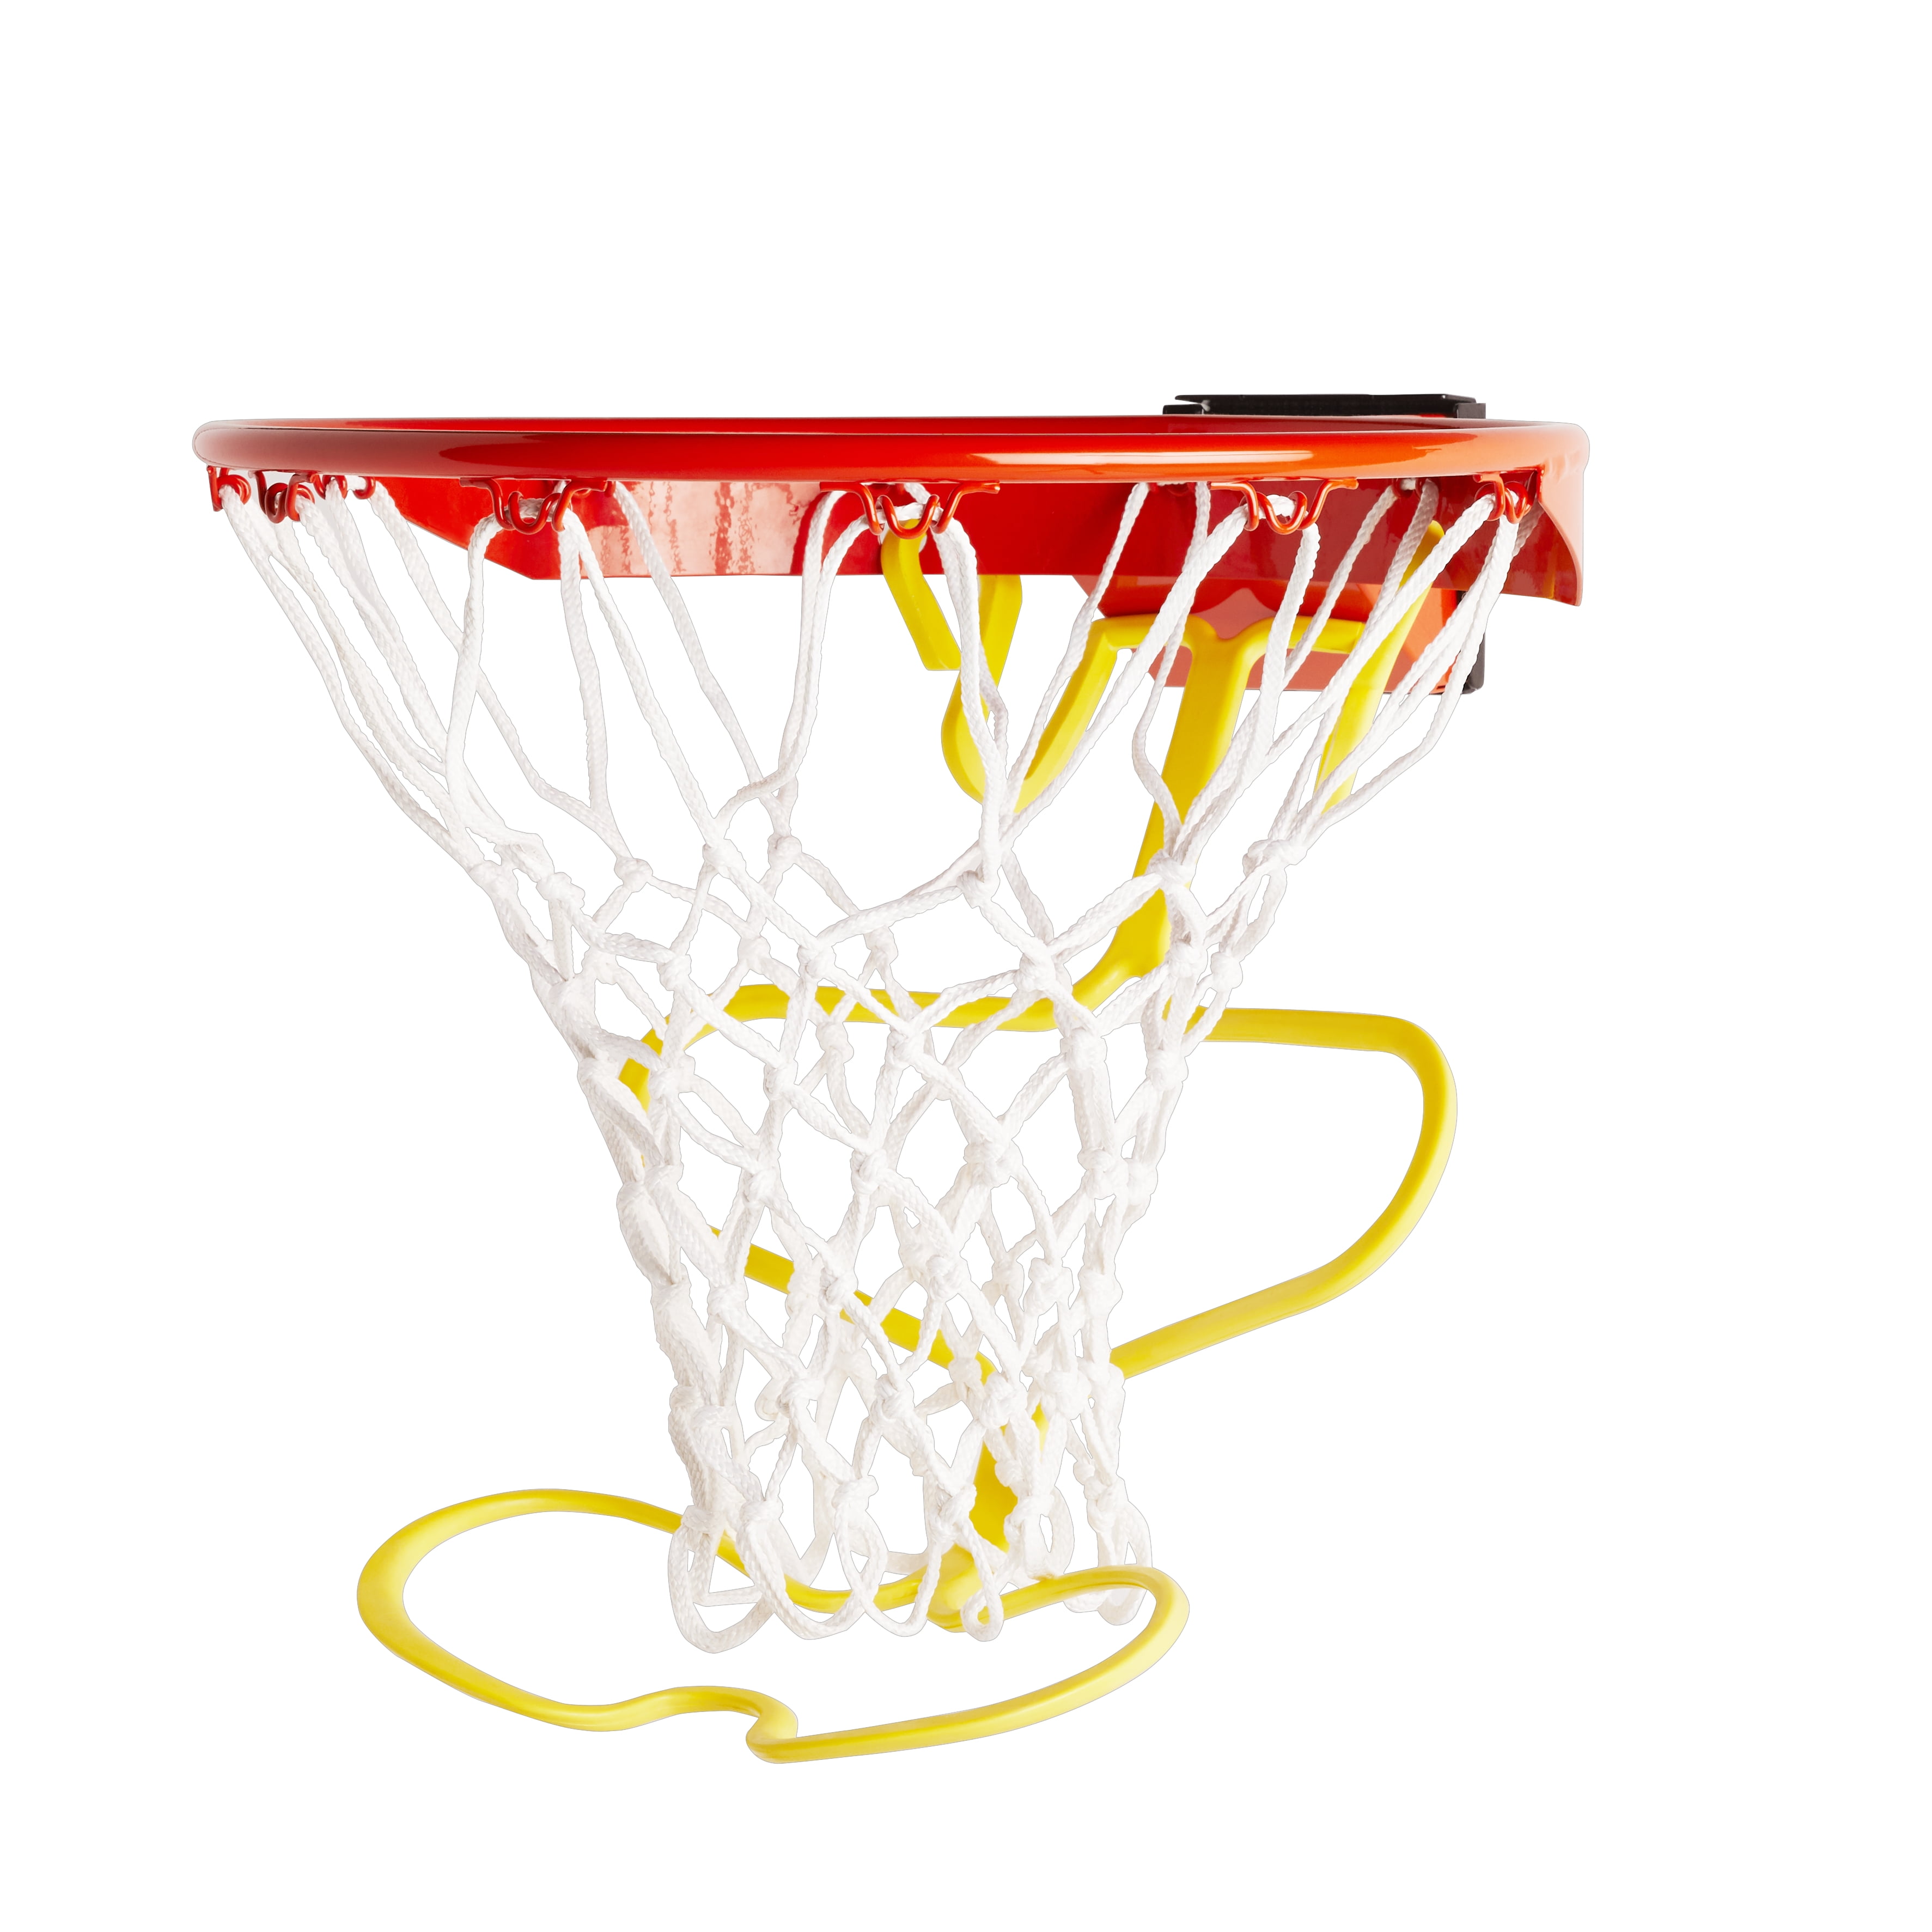 Details about   Flick Glove Basketball Training aid Follow Through/Shooting Accessories 